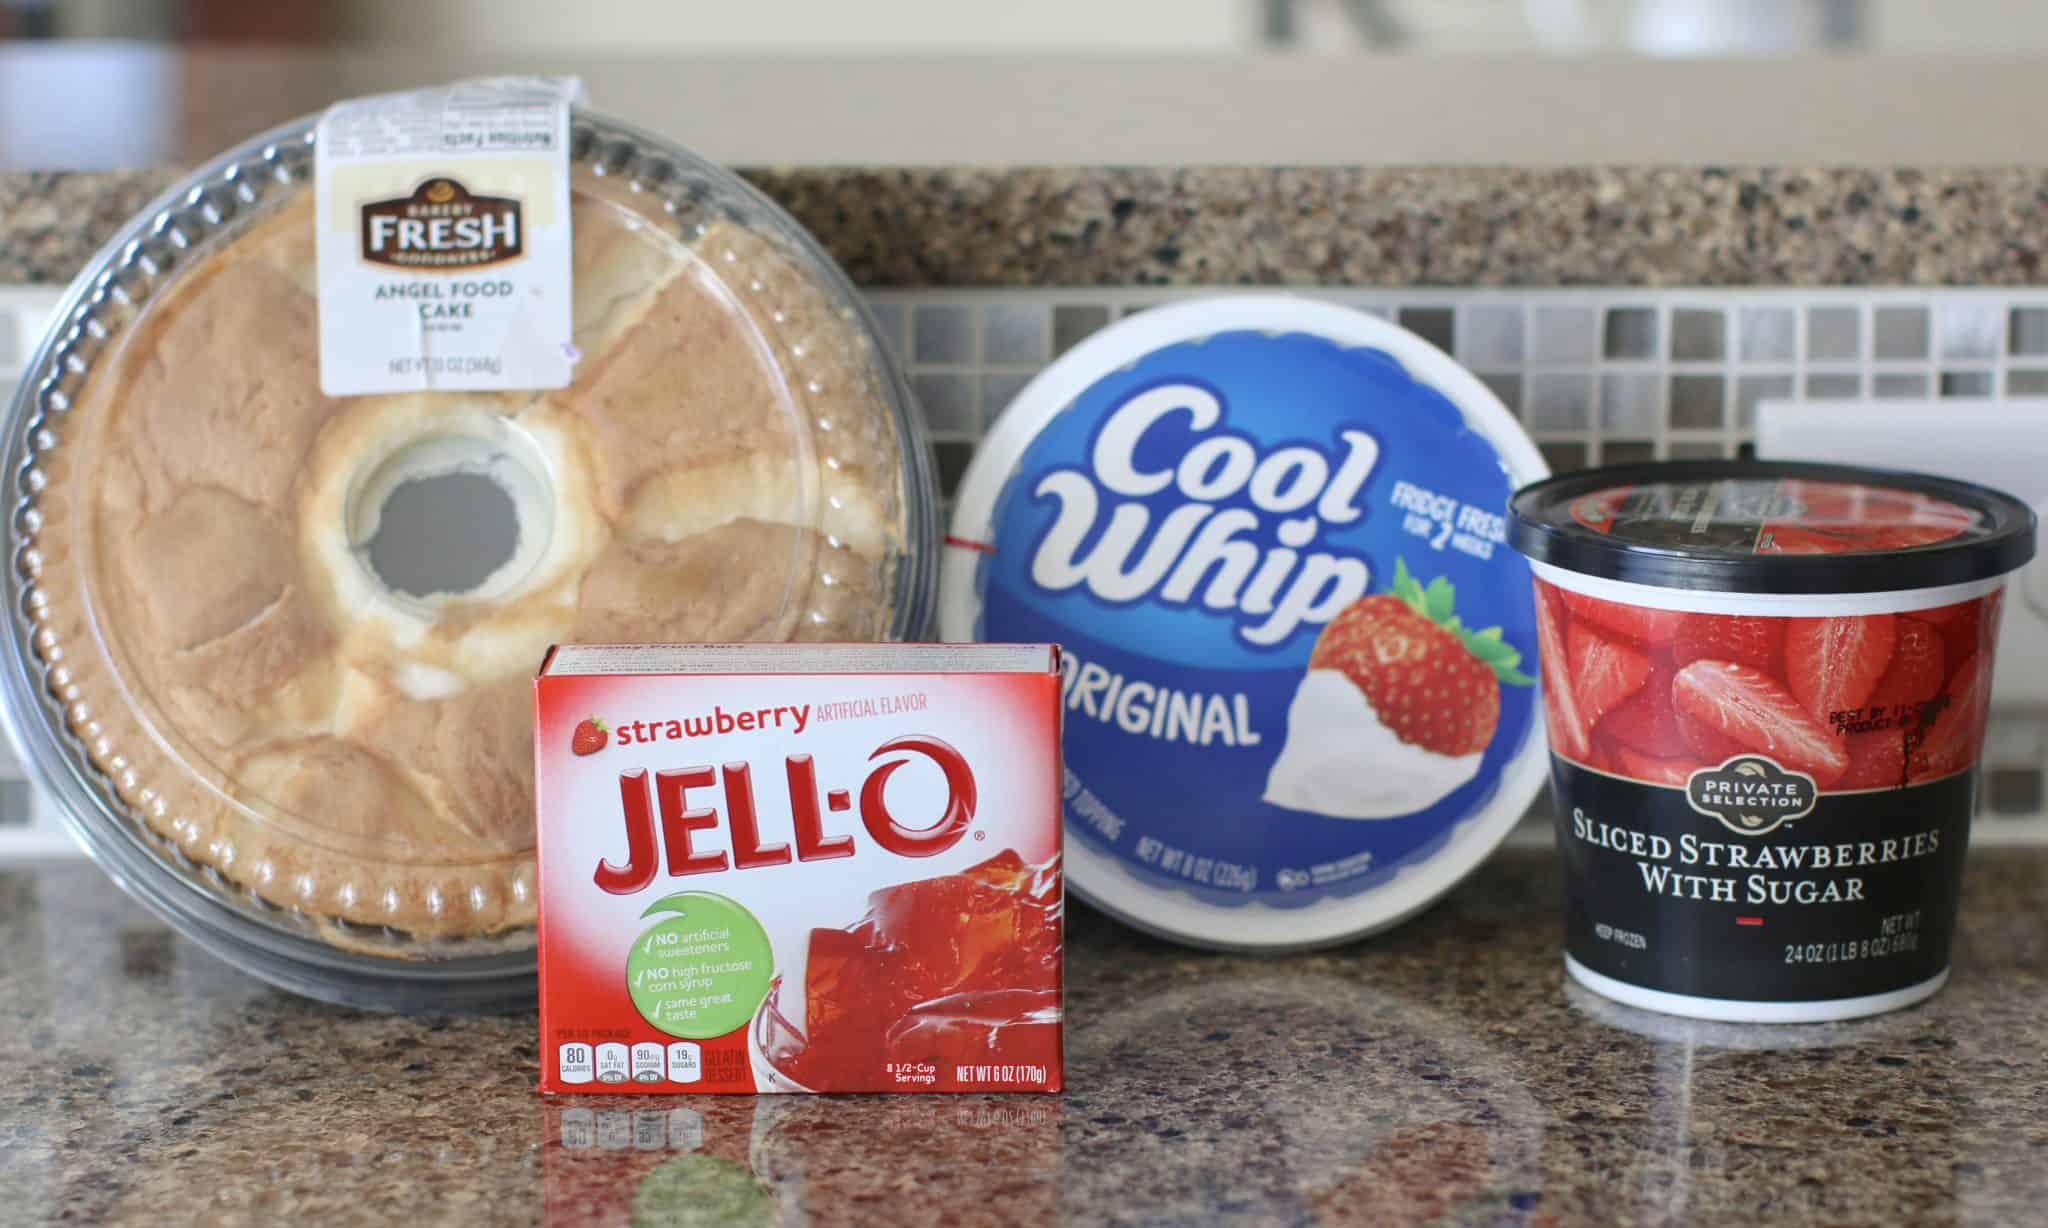 ingredients needed to make no bake strawberry dessert: angel food cake, strawberry gelatin, whipped topping and sliced frozen strawberries with sugar.